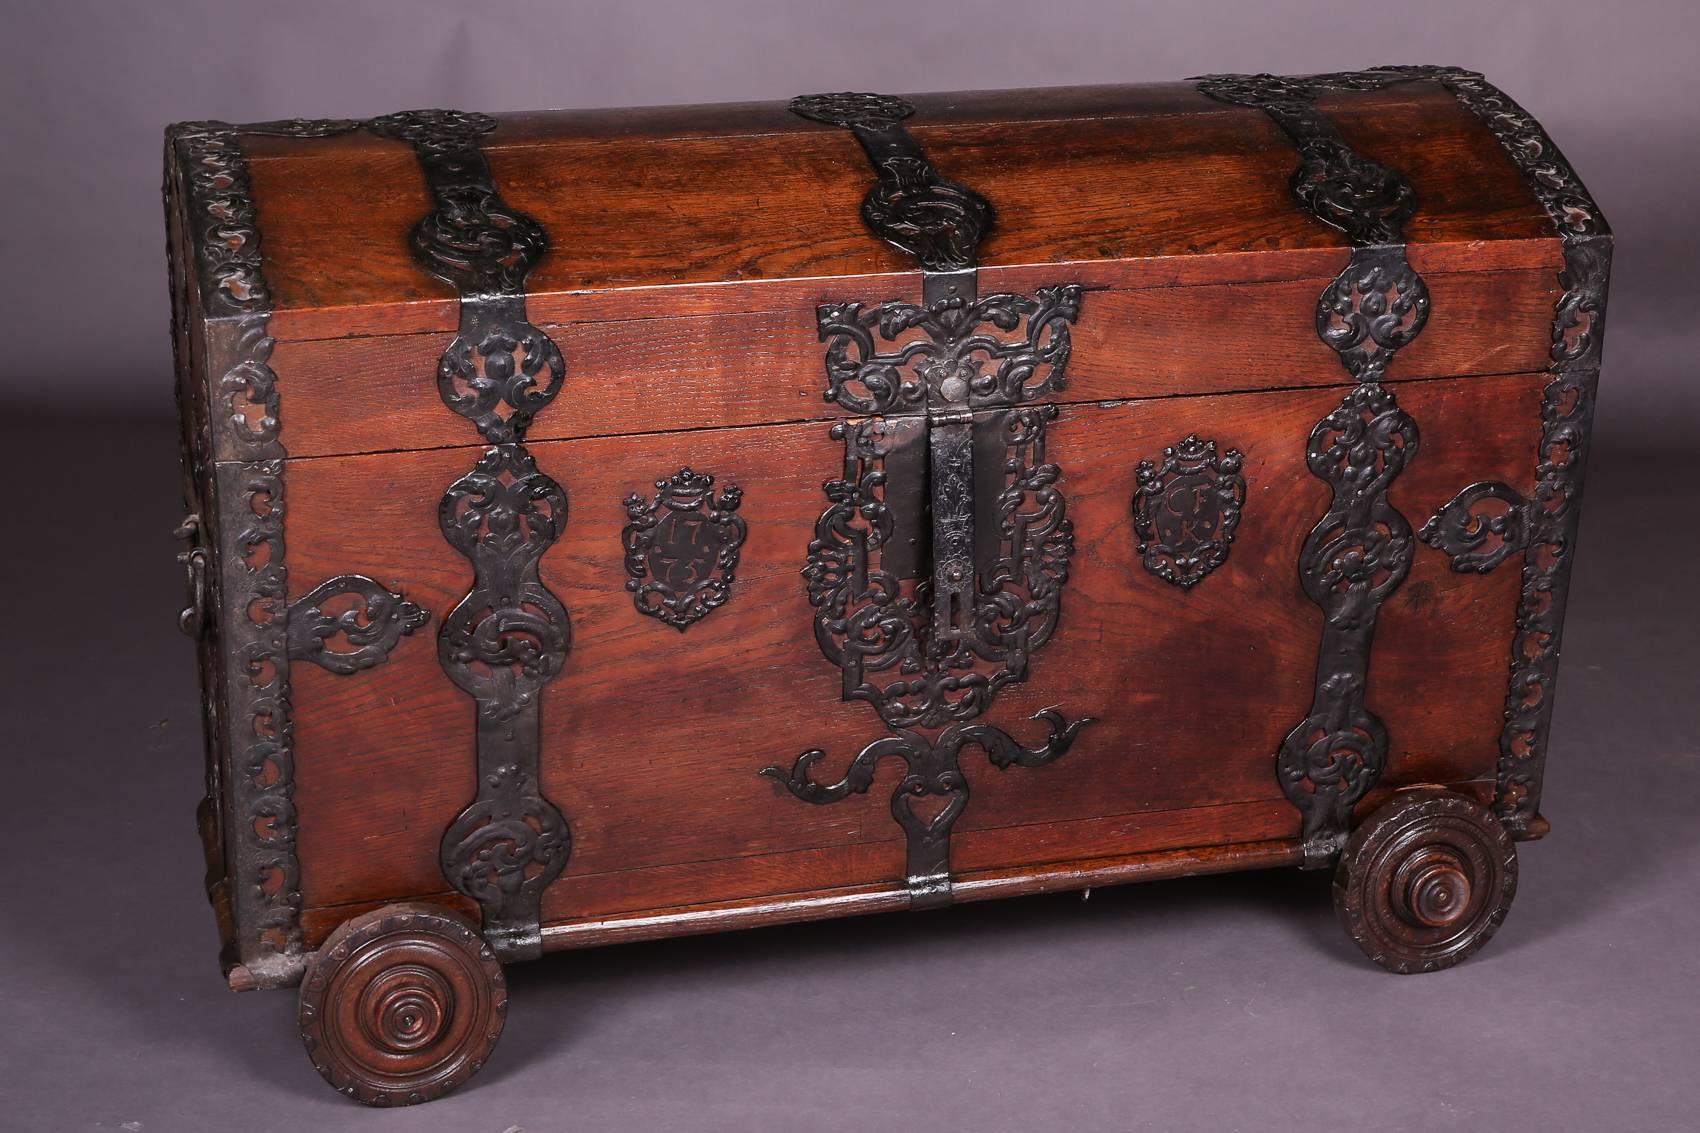 Solid Maron oak with rich wrought iron fittings decorated standing on four wheels.

(V-122).